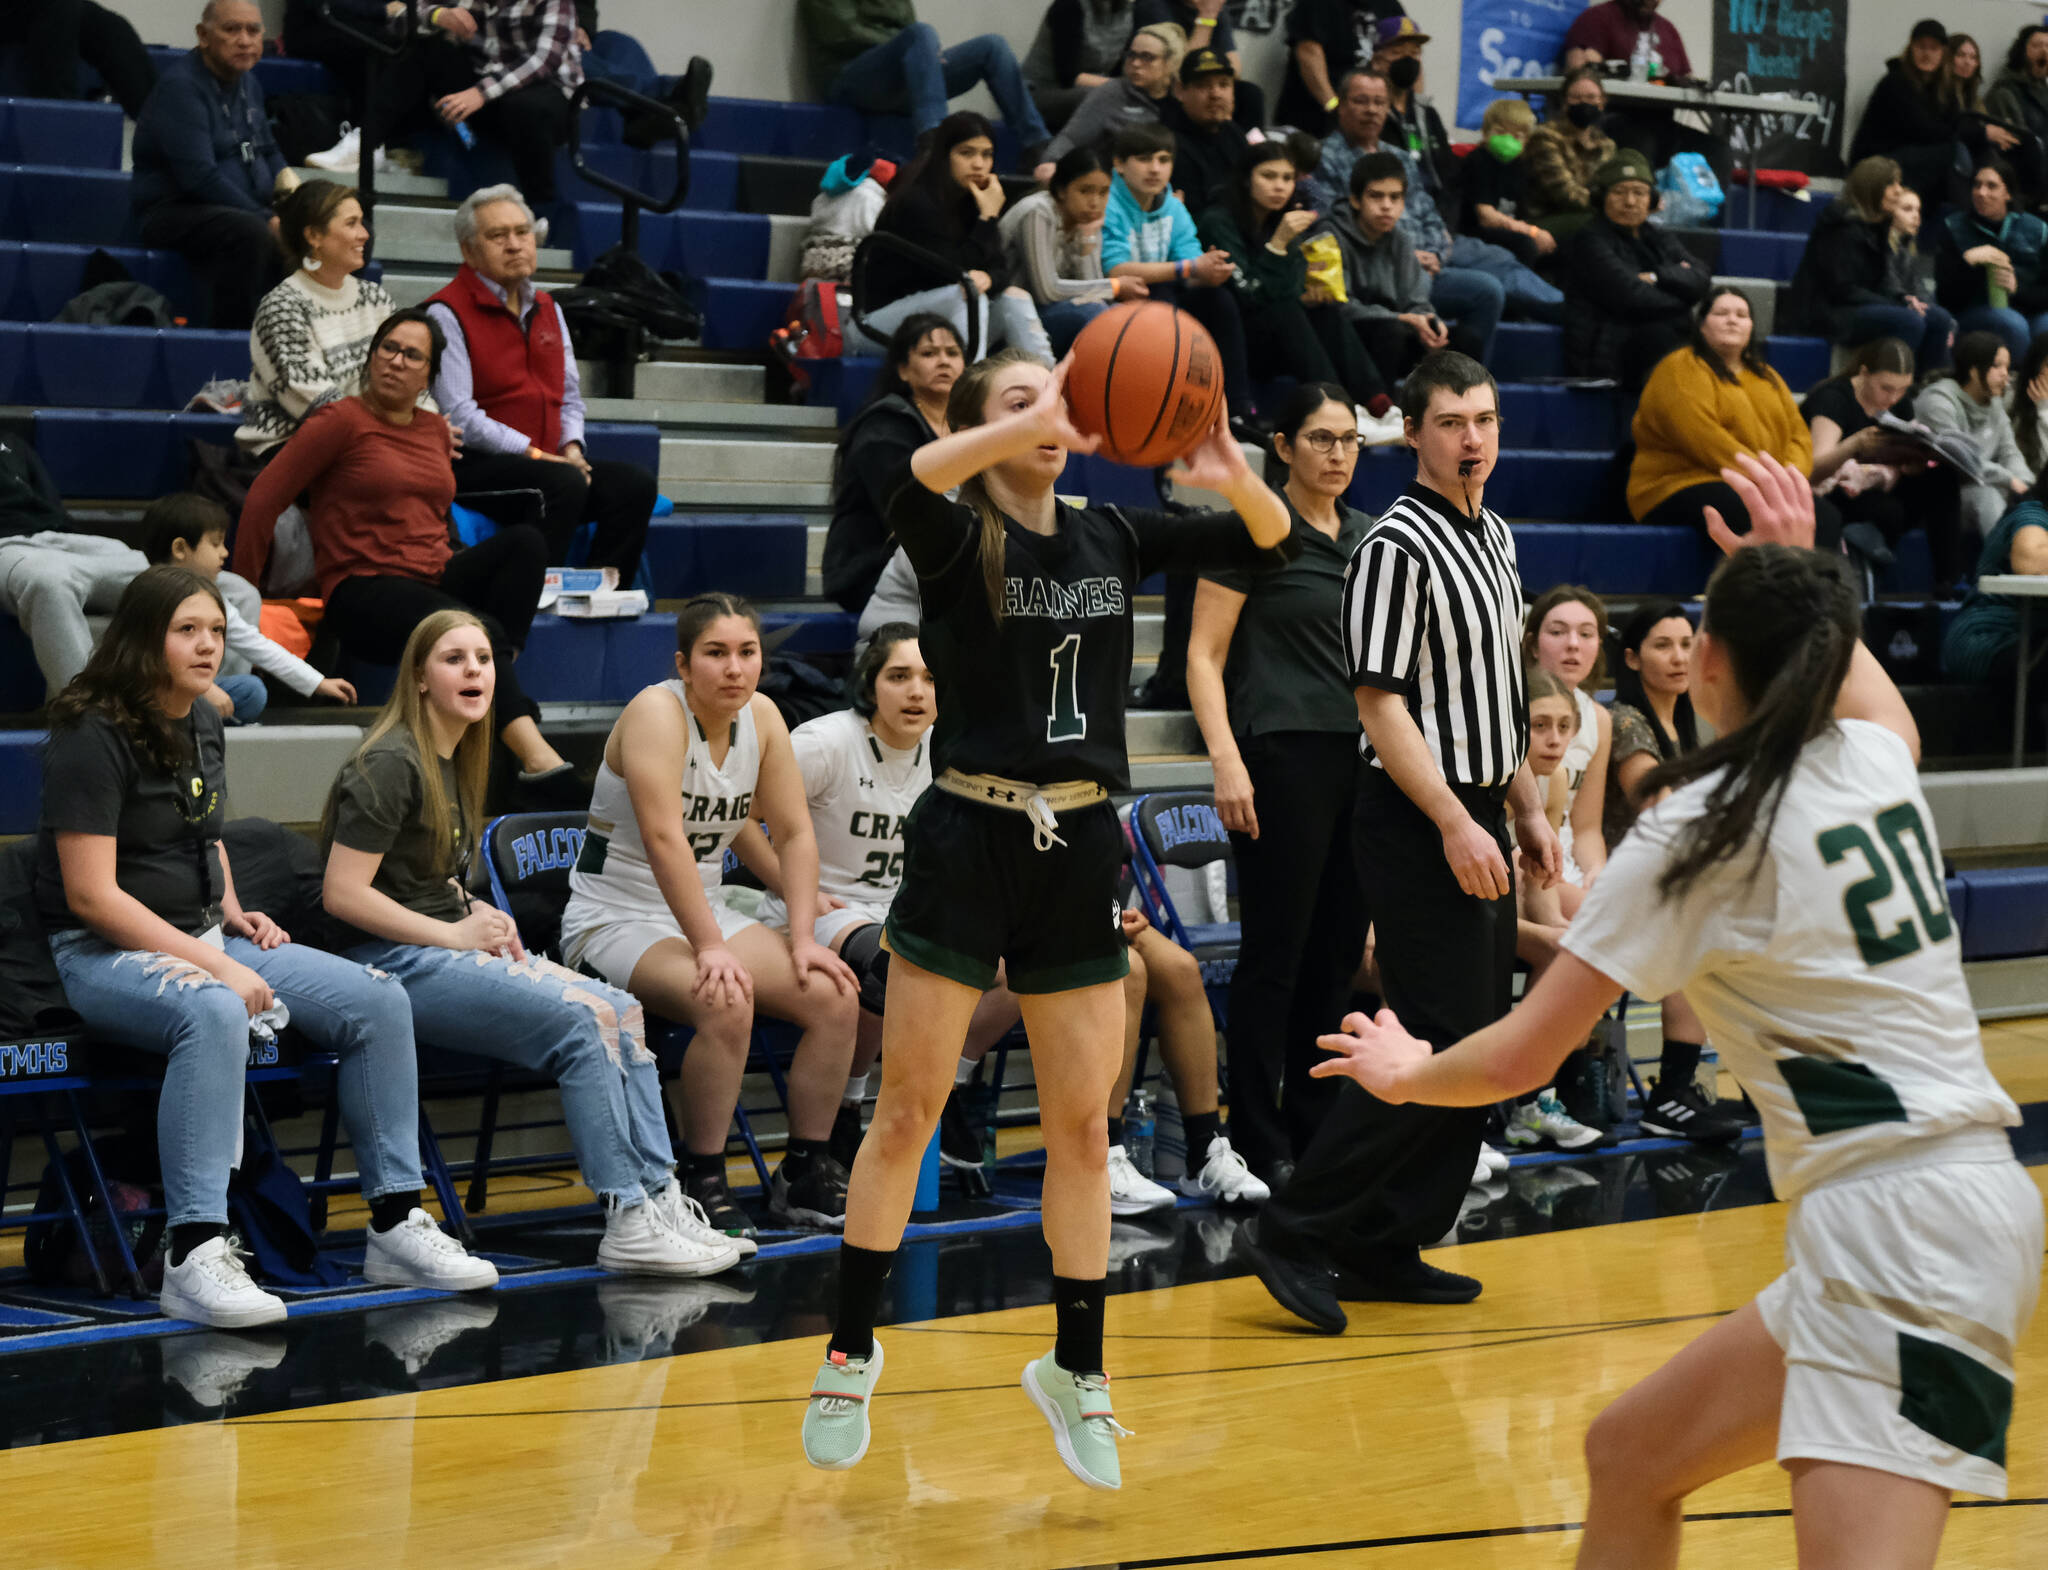 Haines’ MacKenzy Dryden shoots from the arch against Craig during the Region V tournament on Wednesday. (Klas Stolpe / For the Juneau Empire)